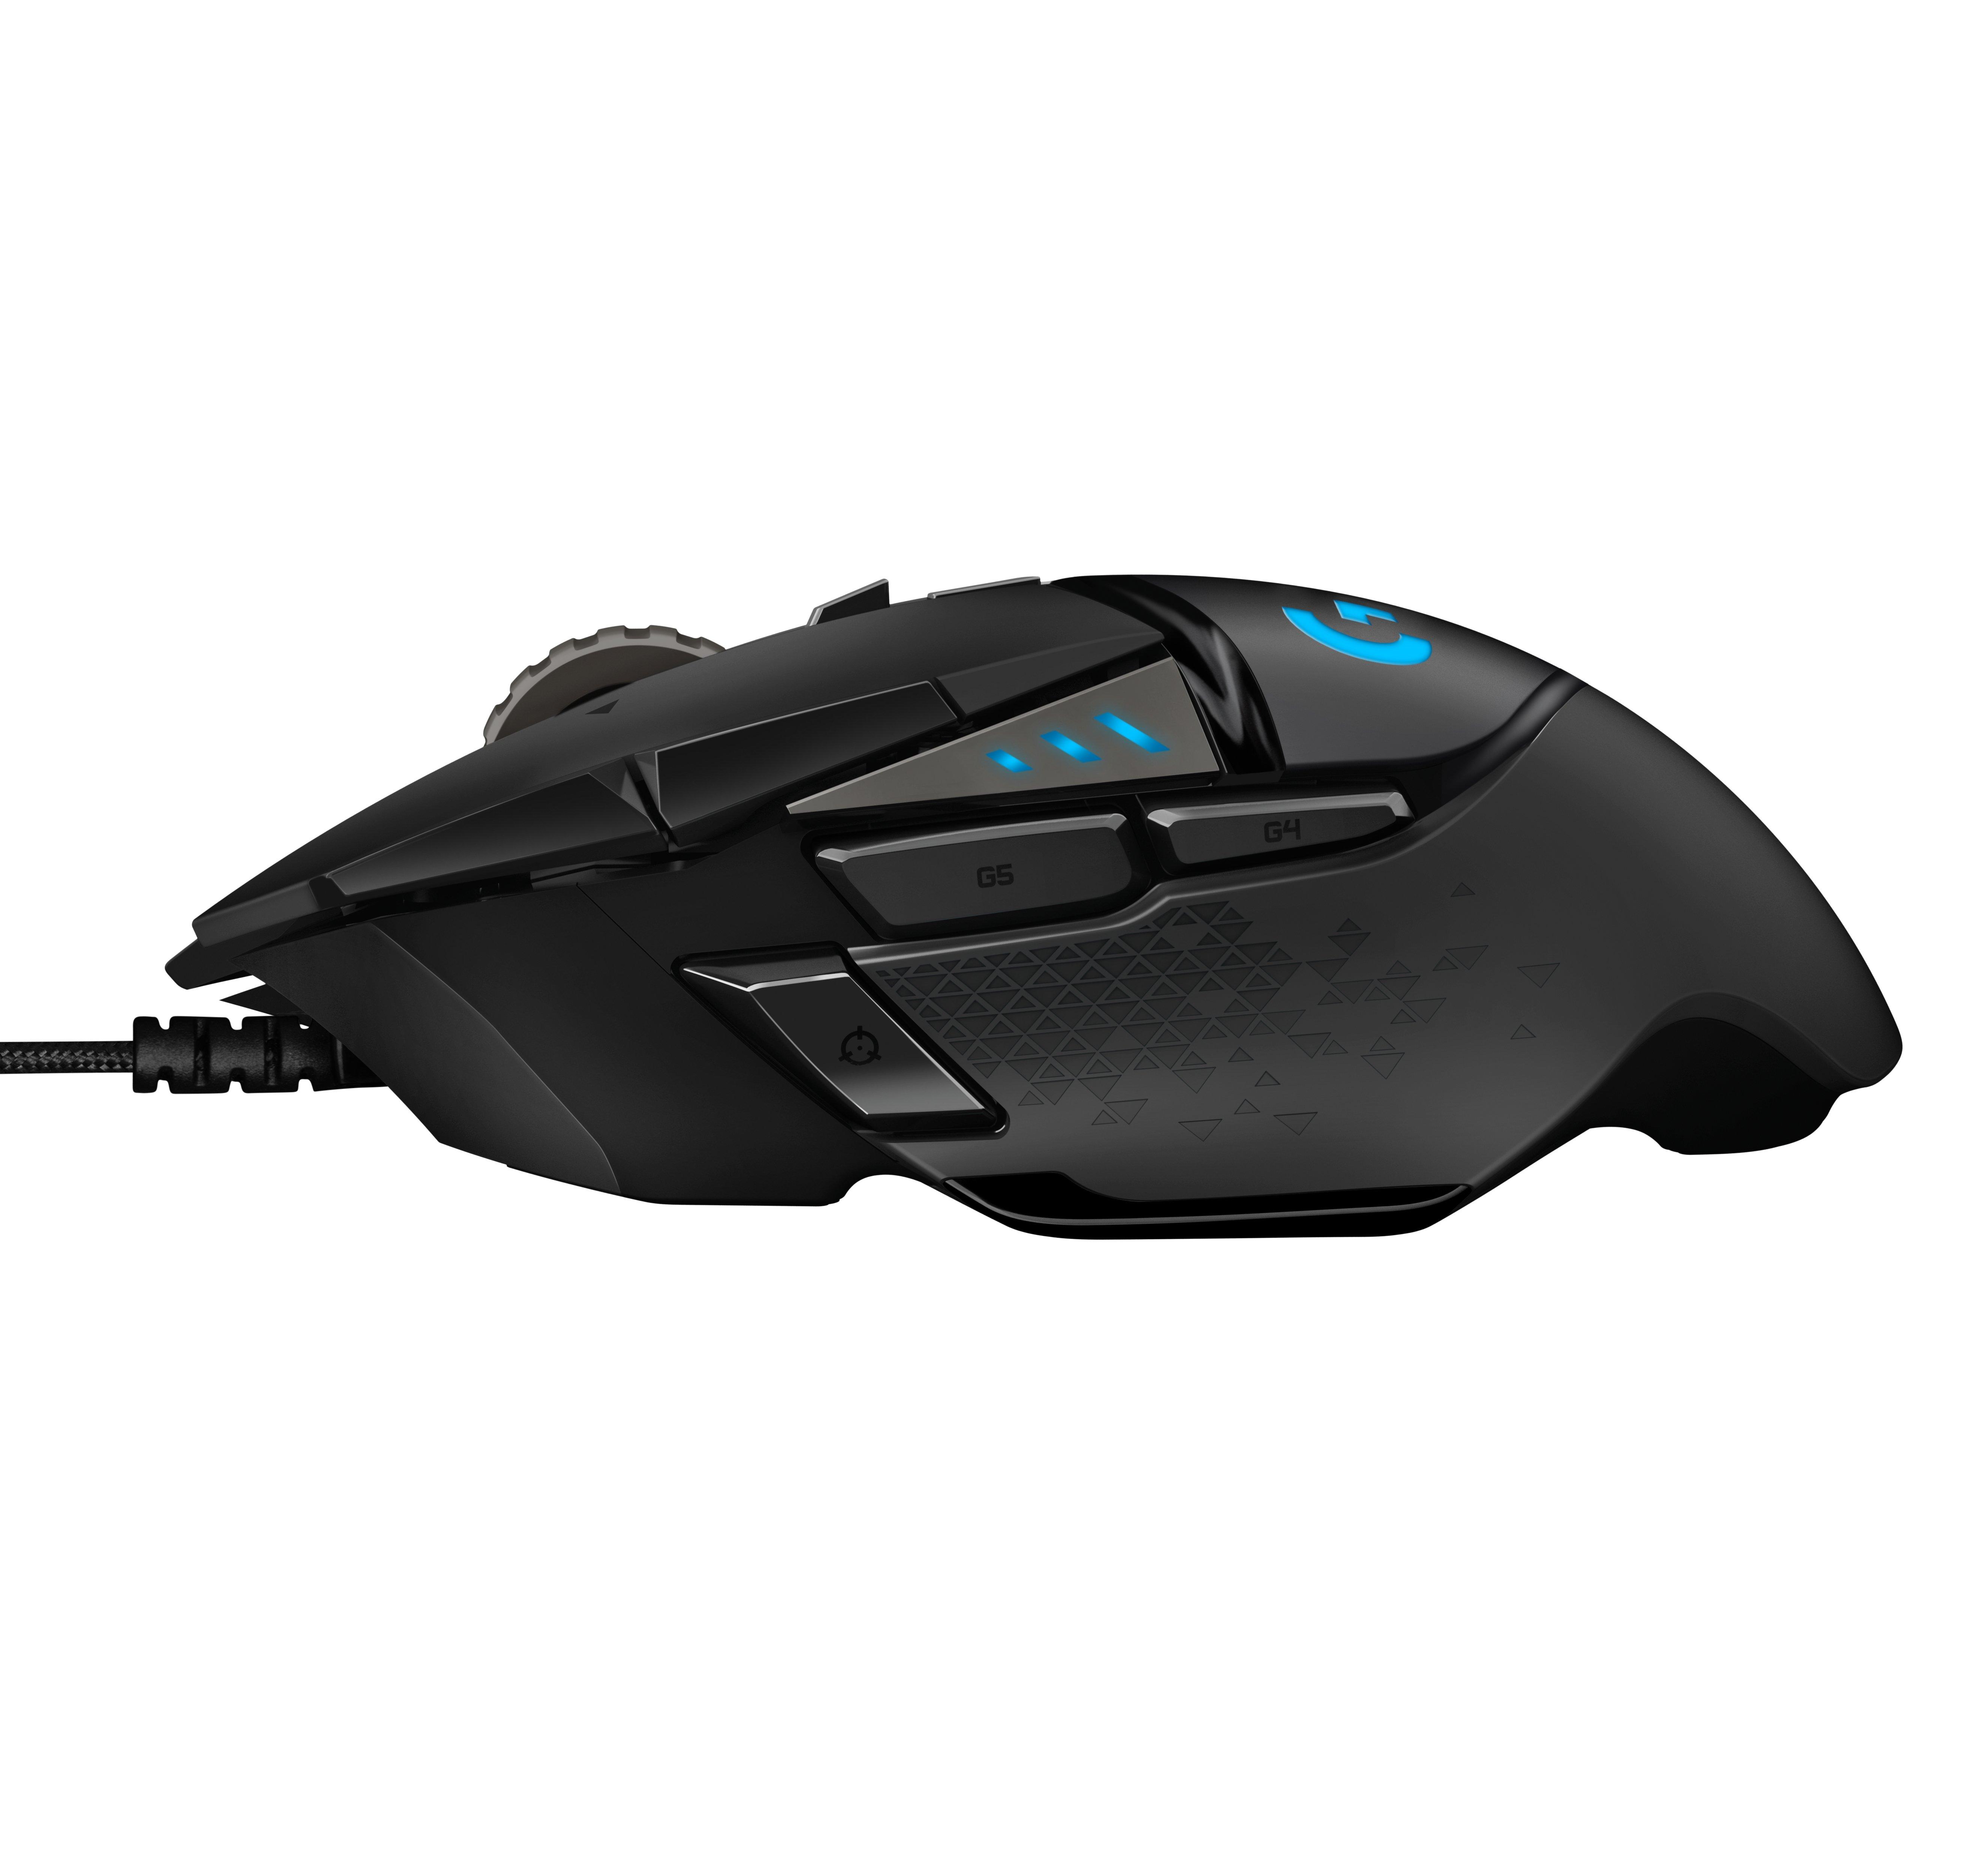 Logitech G - Welcome to the next generation of HERO gaming mice